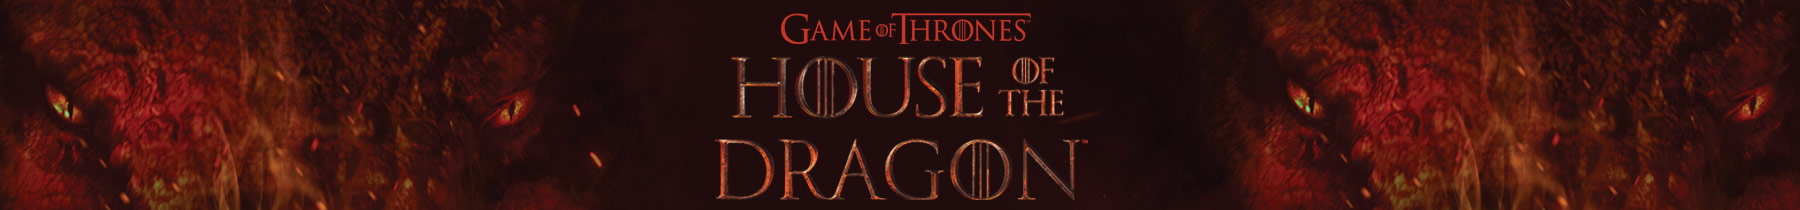 Game of Thrones House of the Dragon Season 1 Trading Cards